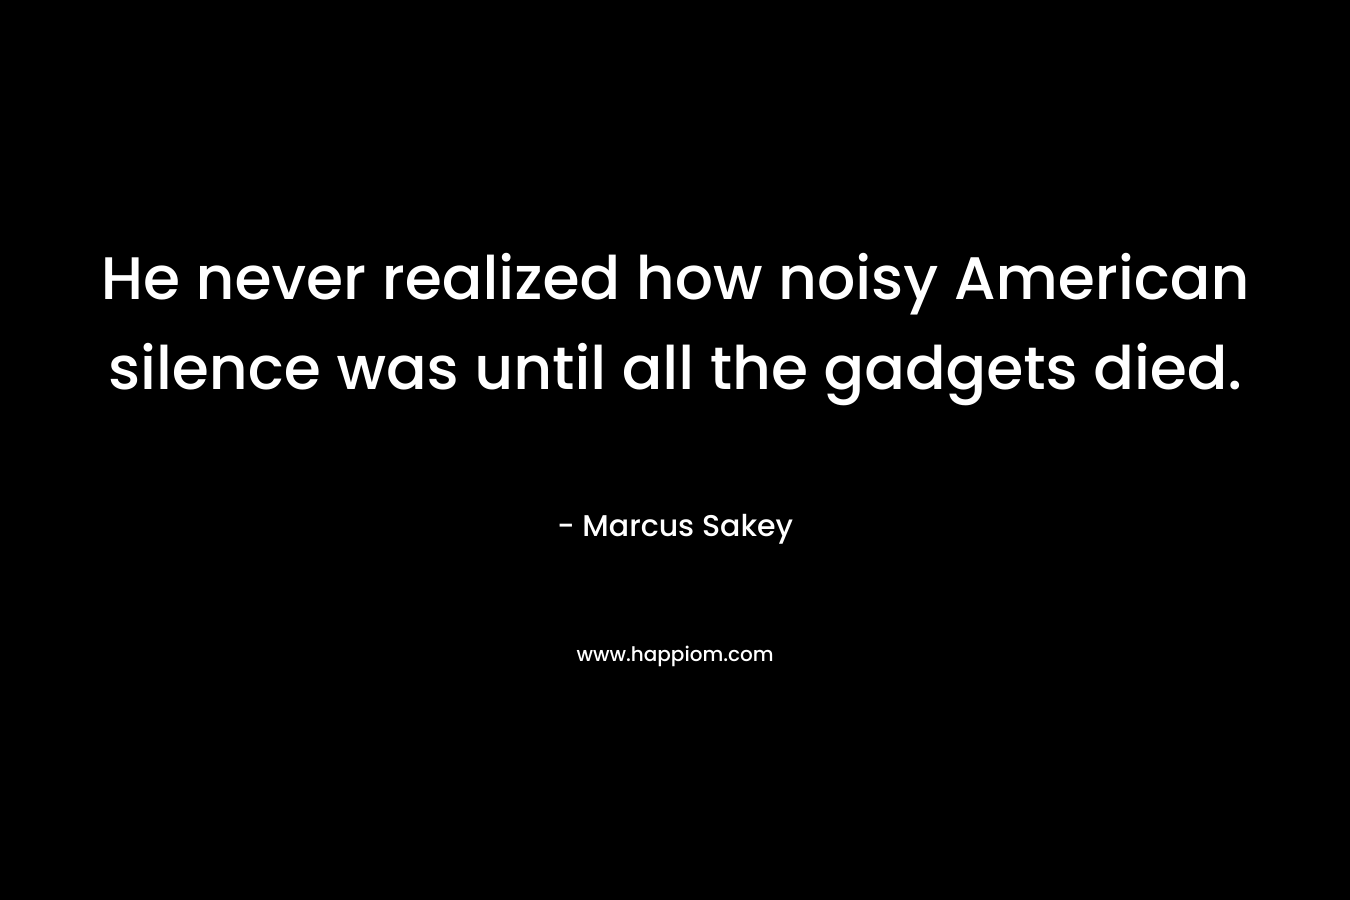 He never realized how noisy American silence was until all the gadgets died. – Marcus Sakey